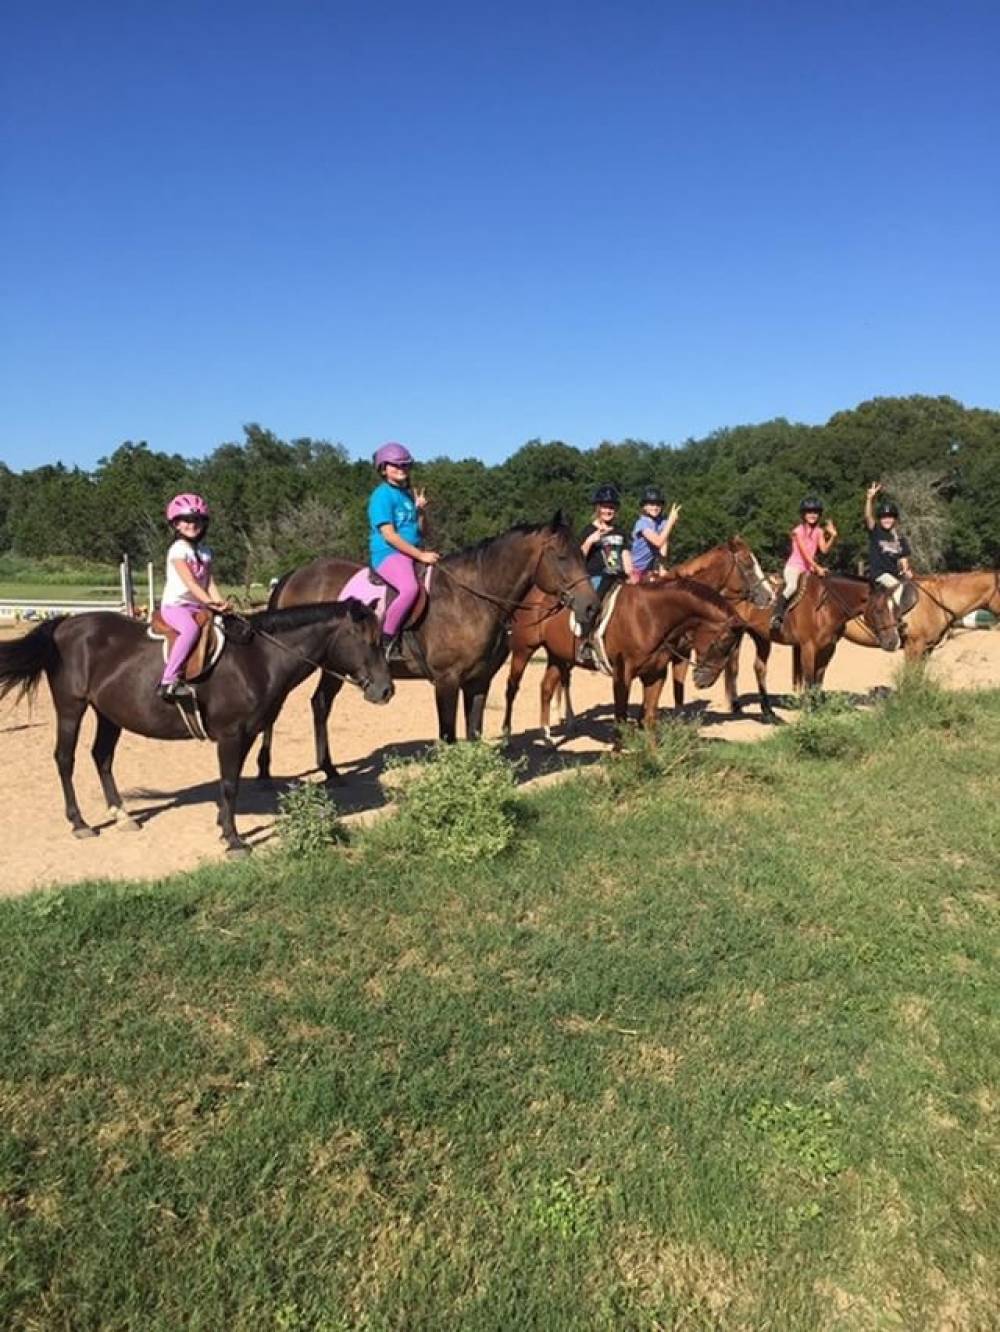 TOP TEXAS HORSE RIDING CAMP: Hunters Chase Farms Inc. is a Top Horse Riding Summer Camp located in Wimberley Texas offering many fun and enriching Horse Riding and other camp programs. Hunters Chase Farms Inc. also offers CIT/LIT and/or Teen Leadership Opportunities, too.